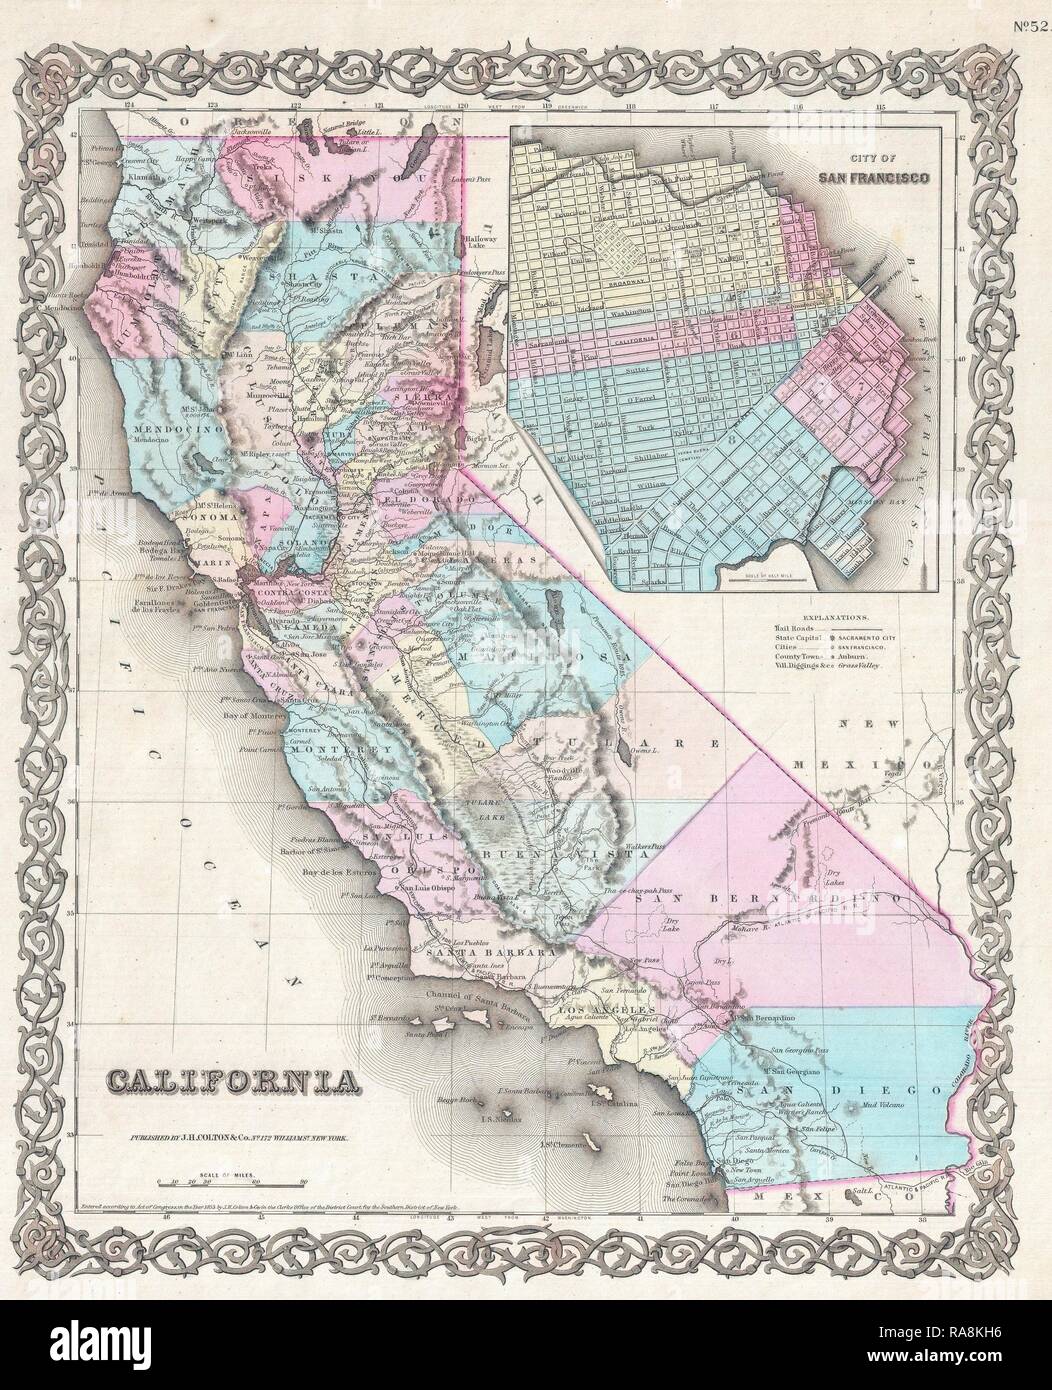 1855, Colton Map of California and San Francisco. Reimagined by Gibon. Classic art with a modern twist reimagined Stock Photo